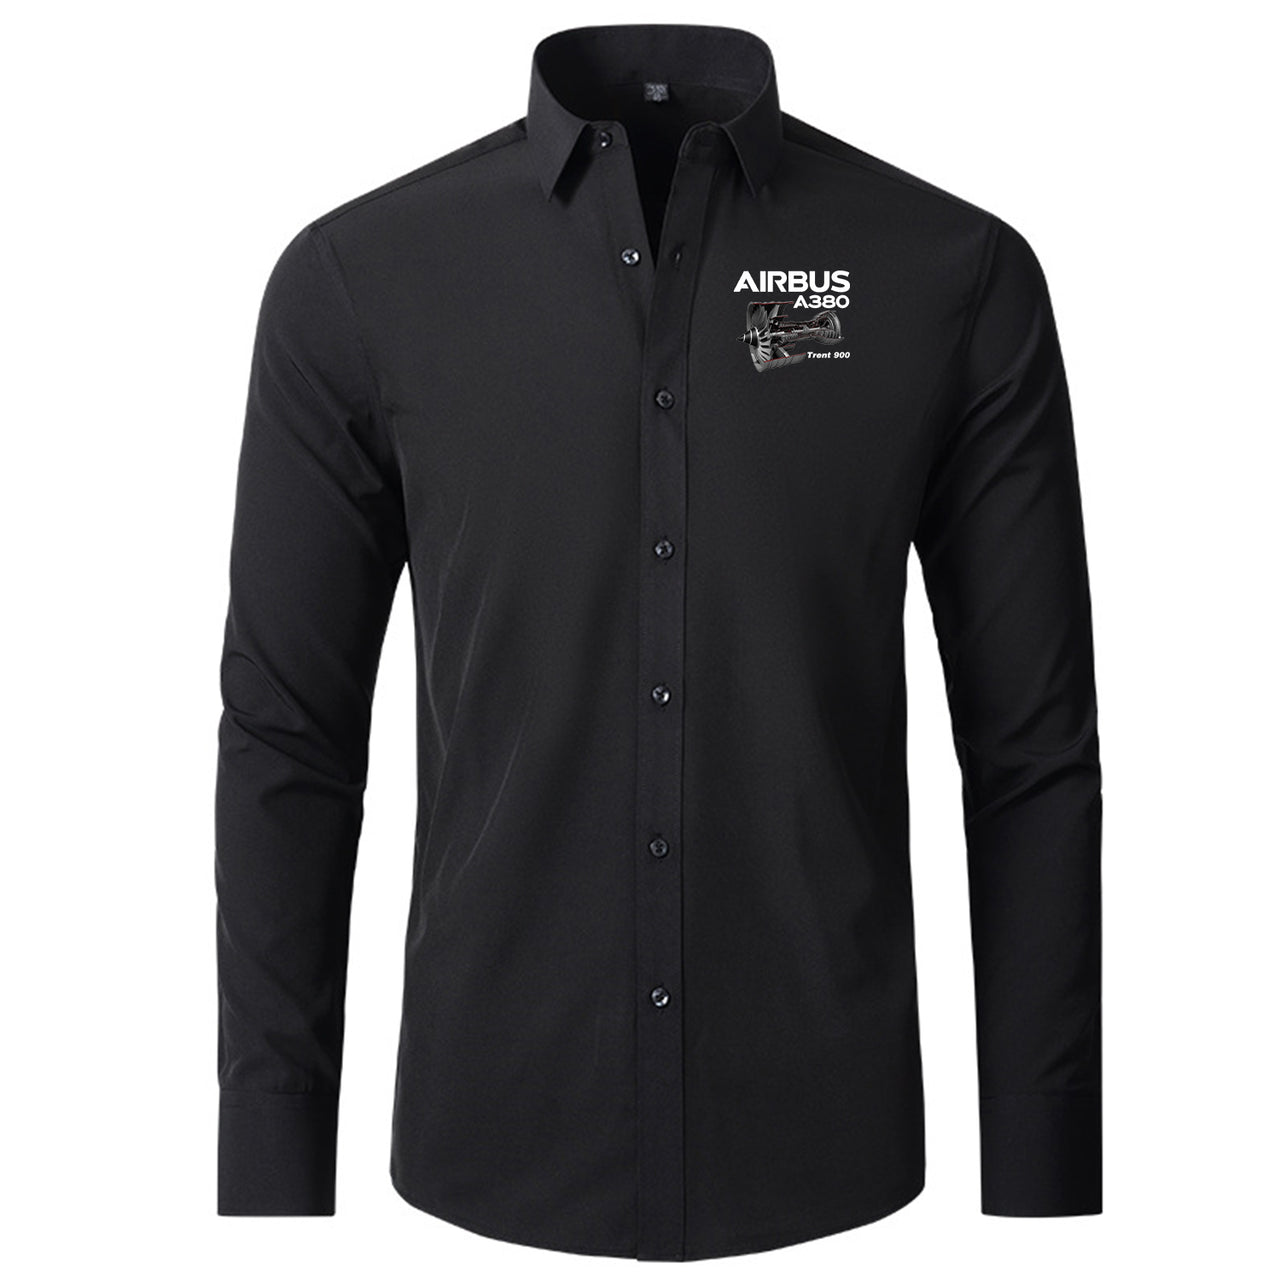 Airbus A380 & Trent 900 Engine Designed Long Sleeve Shirts